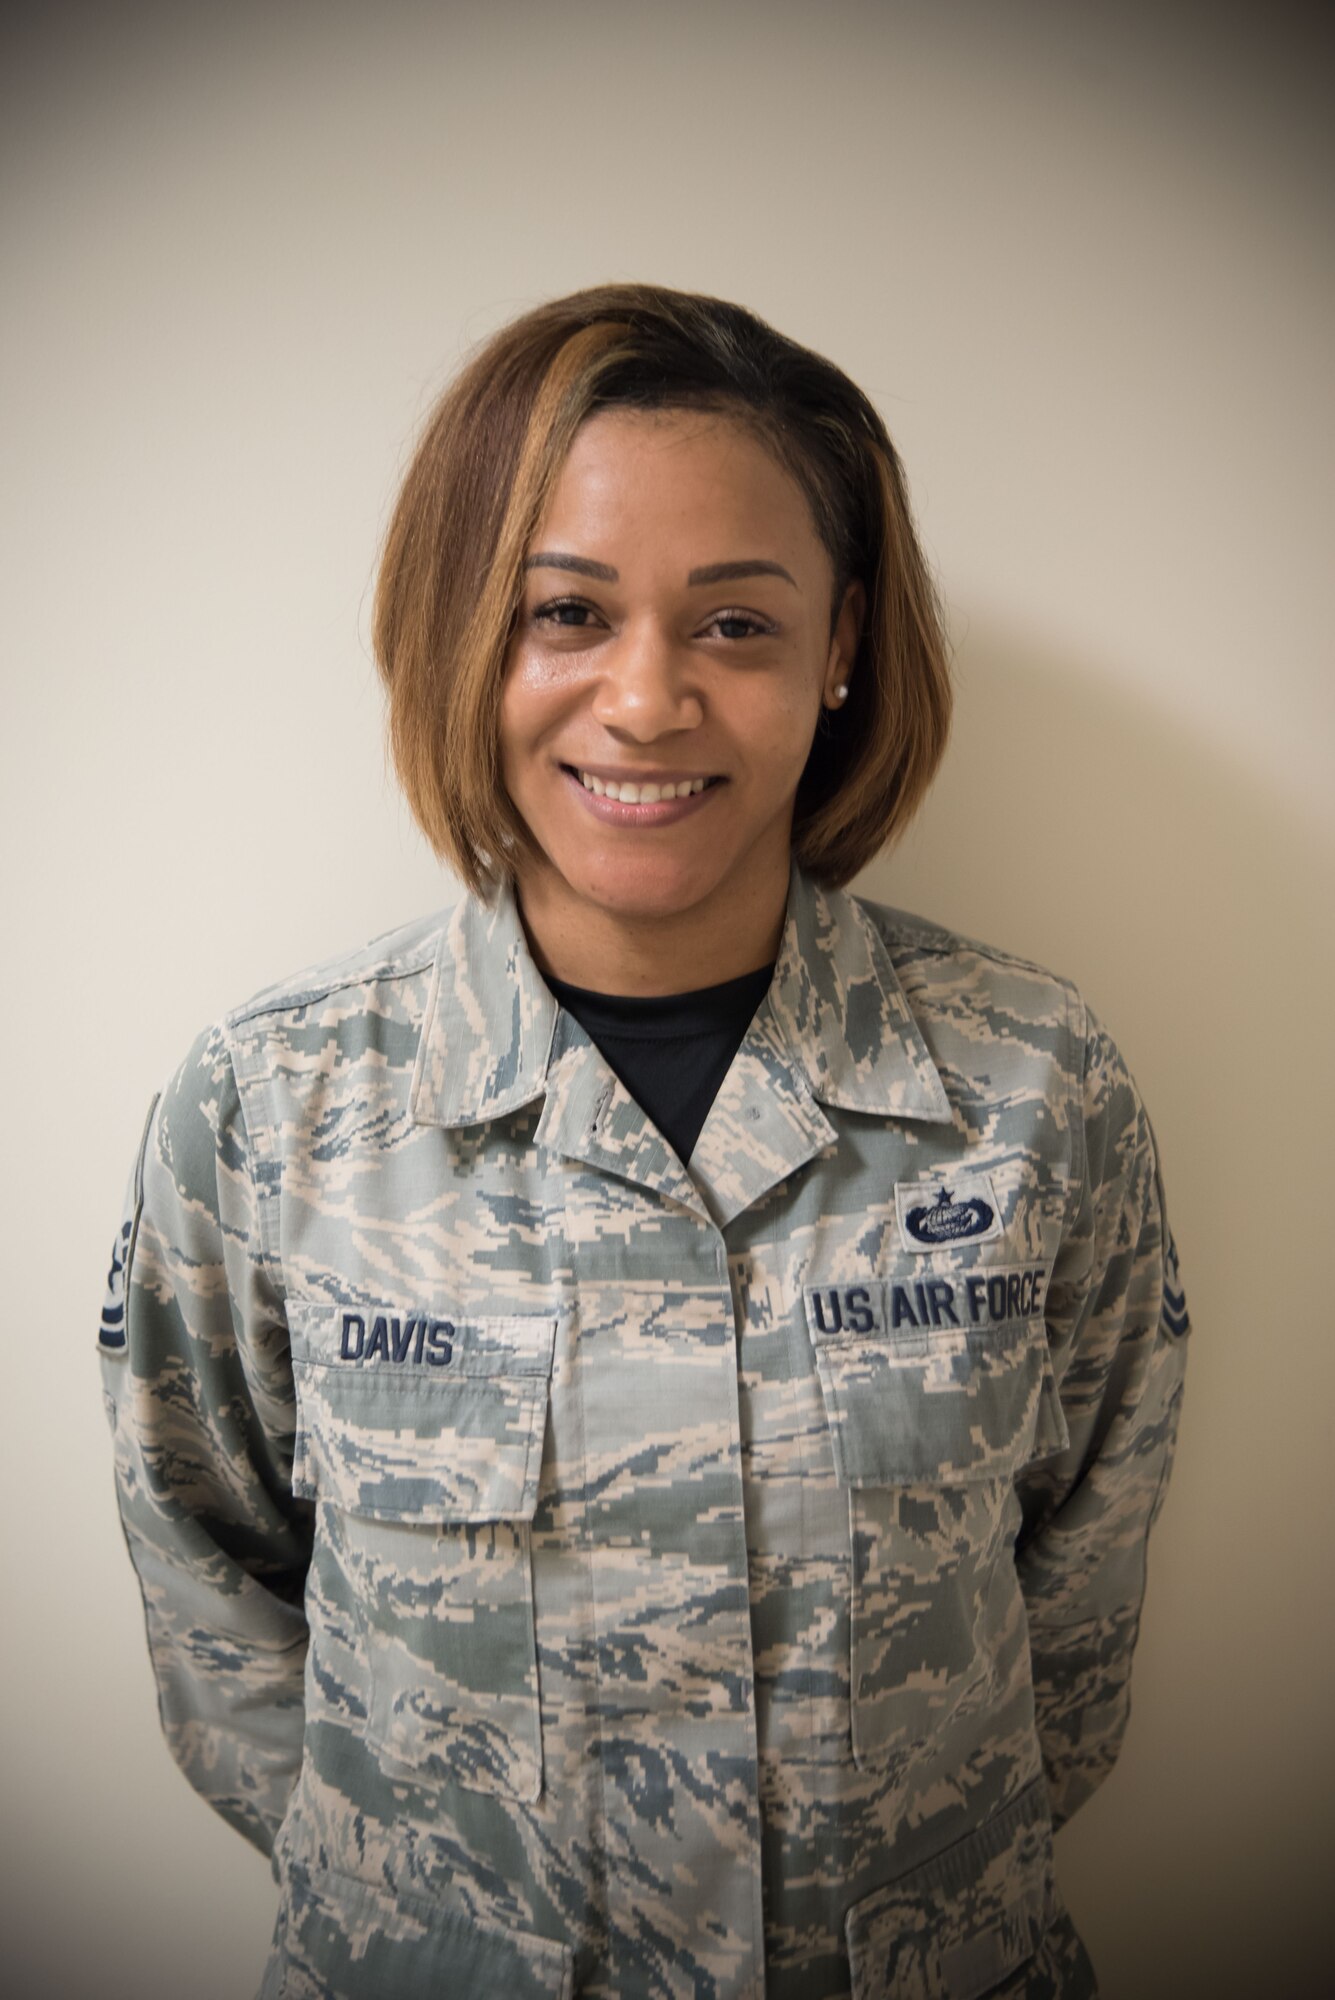 Master Sgt. Sierra Davis, 403rd Wing Yellow Ribbon Program coordinator, poses for a photo after being named senior noncomissioned officer of the quarter June 2, 2017 at Keesler Air Force Base, Mississippi. (U.S. Air Force photo/Maj. Marnee A.C. Losurdo)